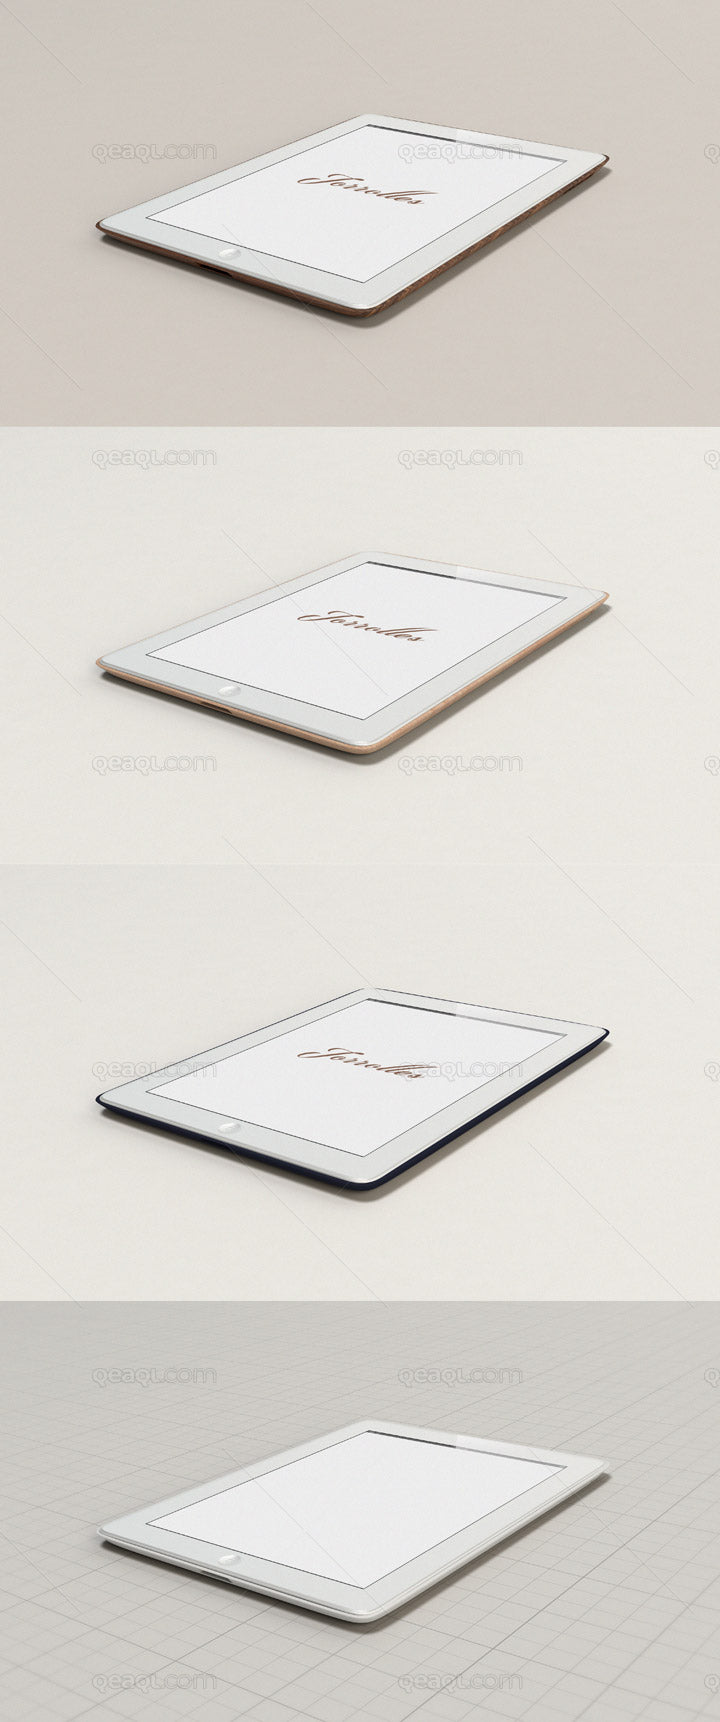 Free Side Angle View of iPad Mockup on a Plastic or Wooden Surface